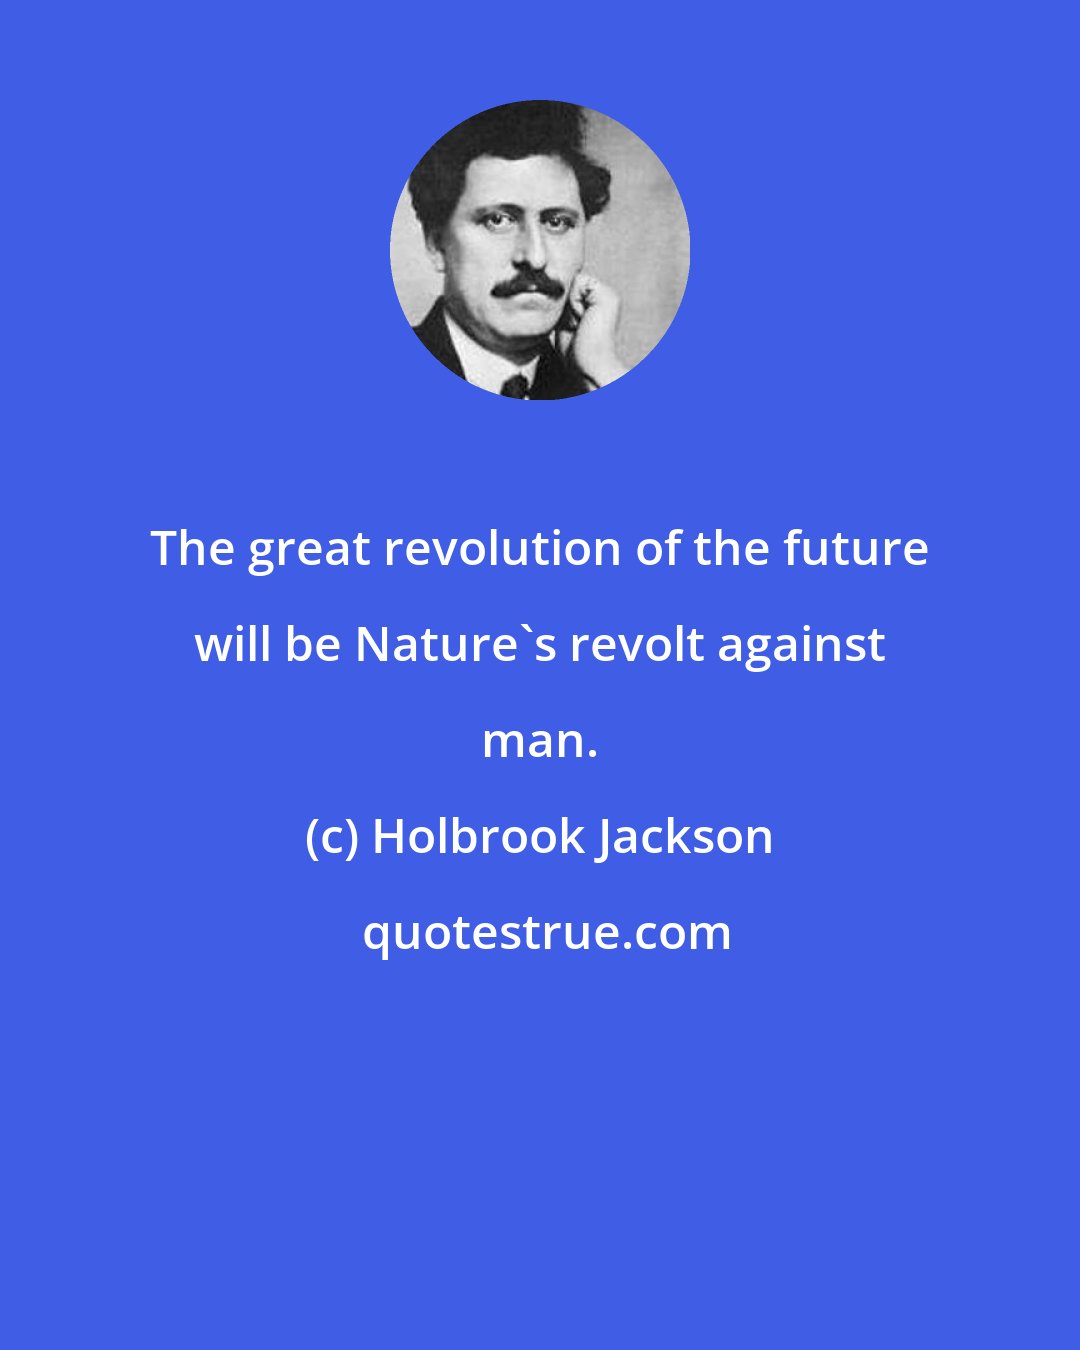 Holbrook Jackson: The great revolution of the future will be Nature's revolt against man.